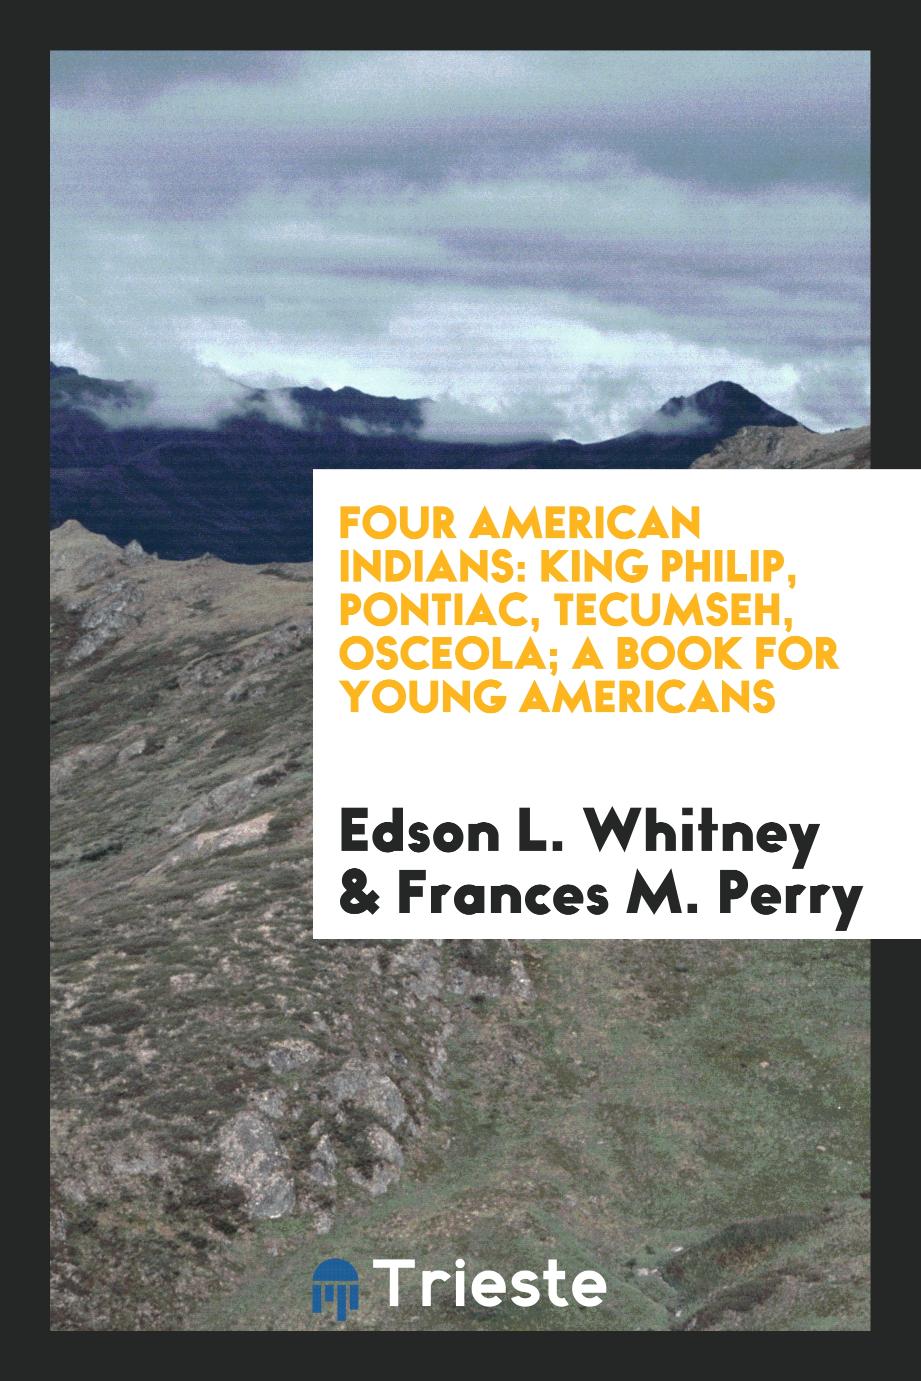 Four American Indians: King Philip, Pontiac, Tecumseh, Osceola; a book for young Americans